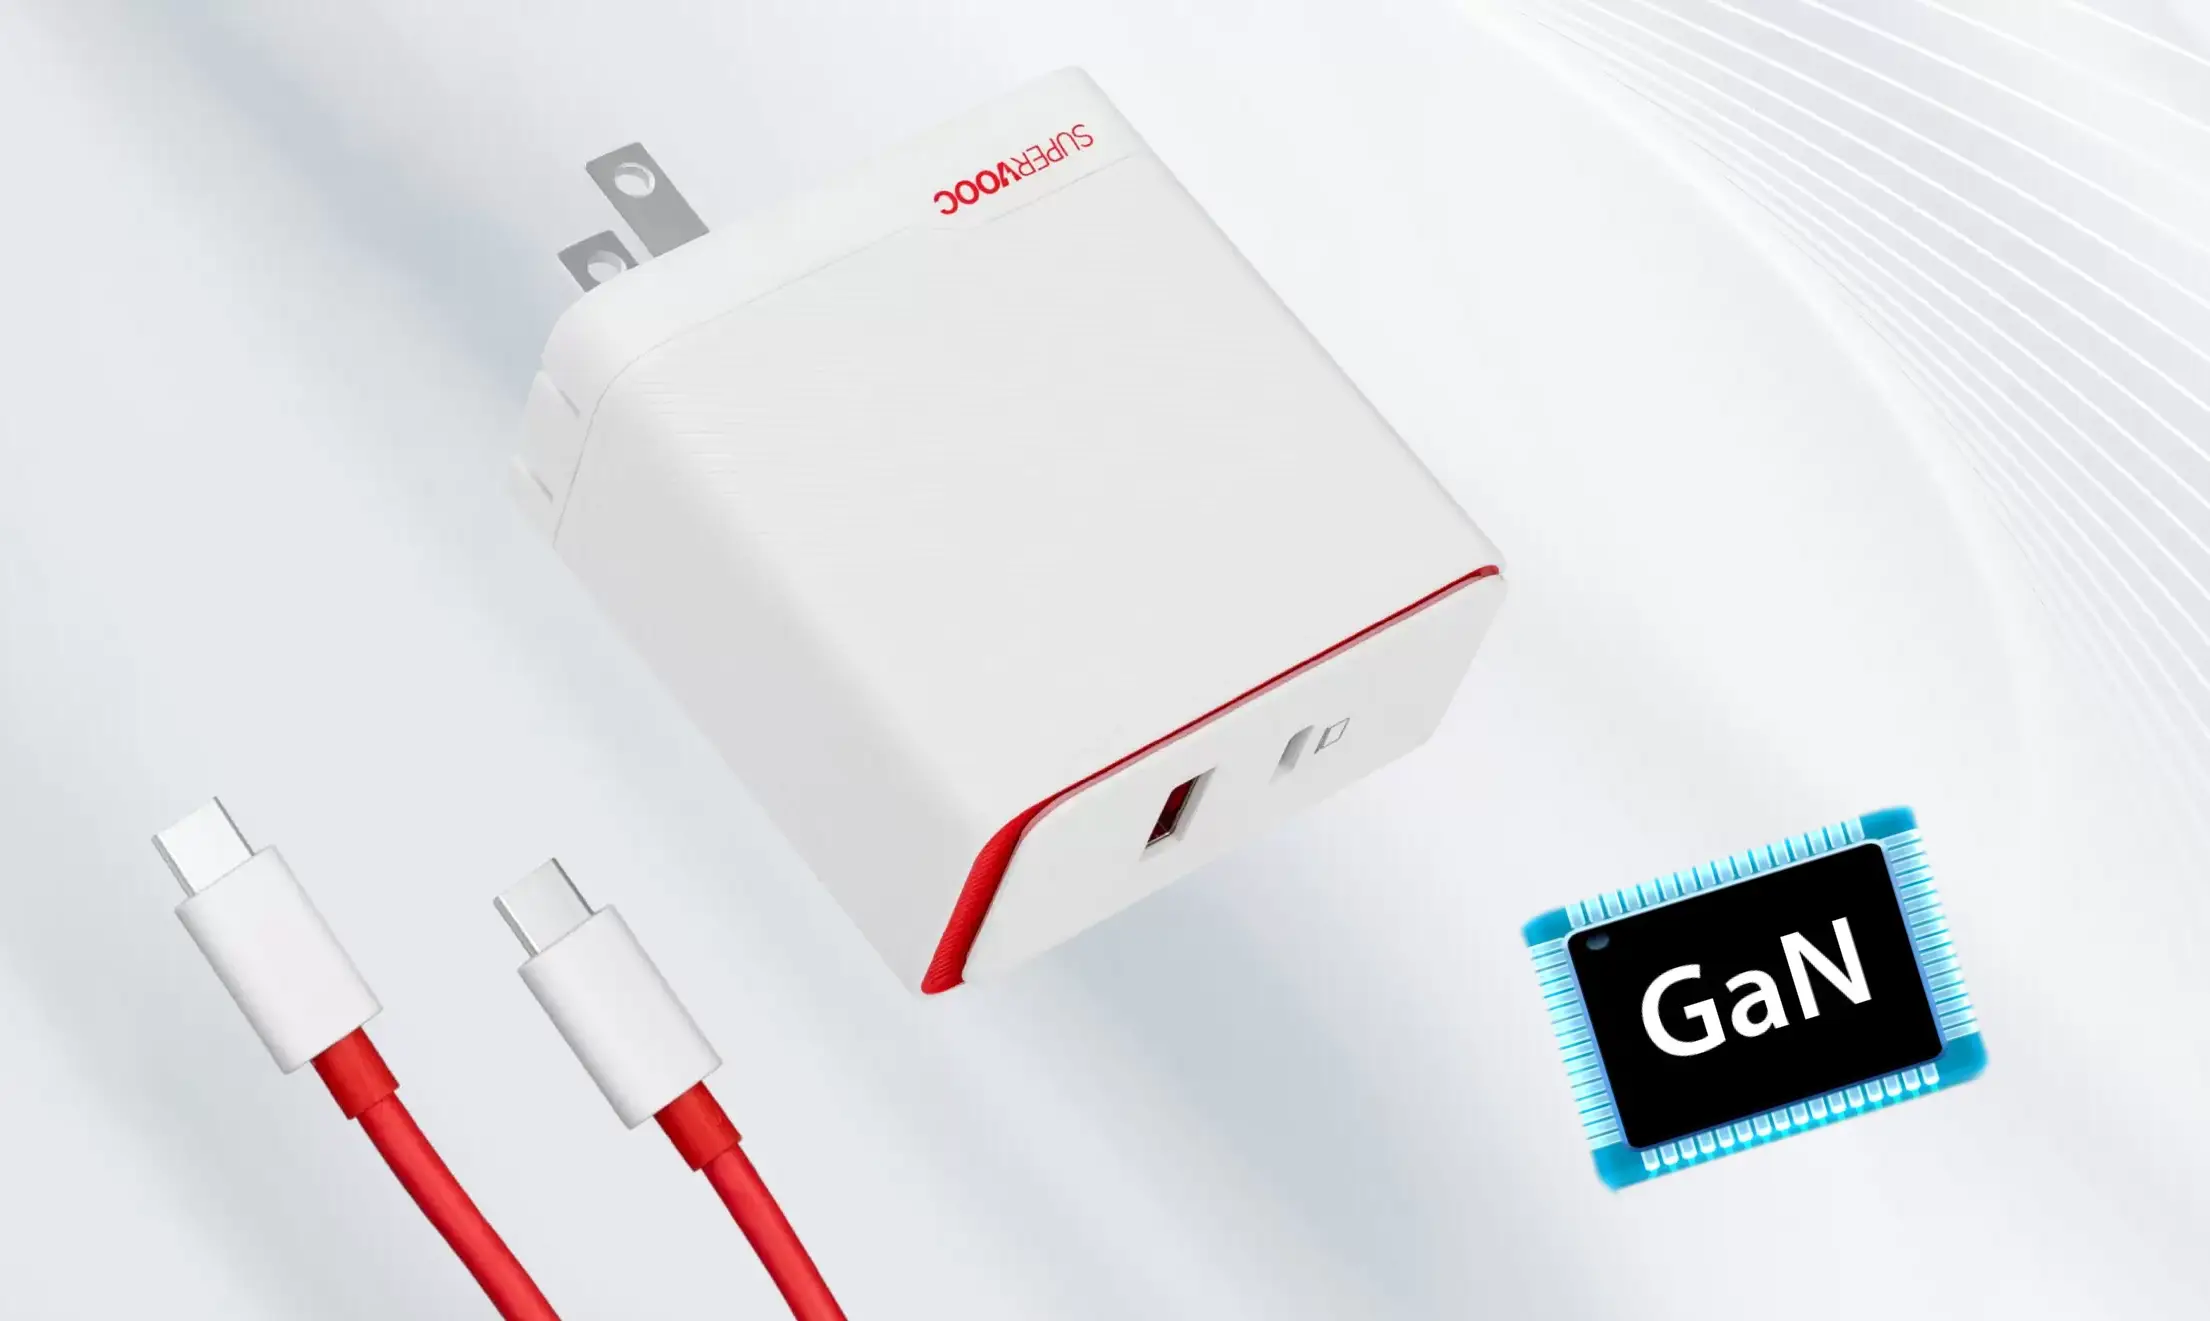 OnePlus SUPERVOOC 100W charger and the emergence of GaN tech